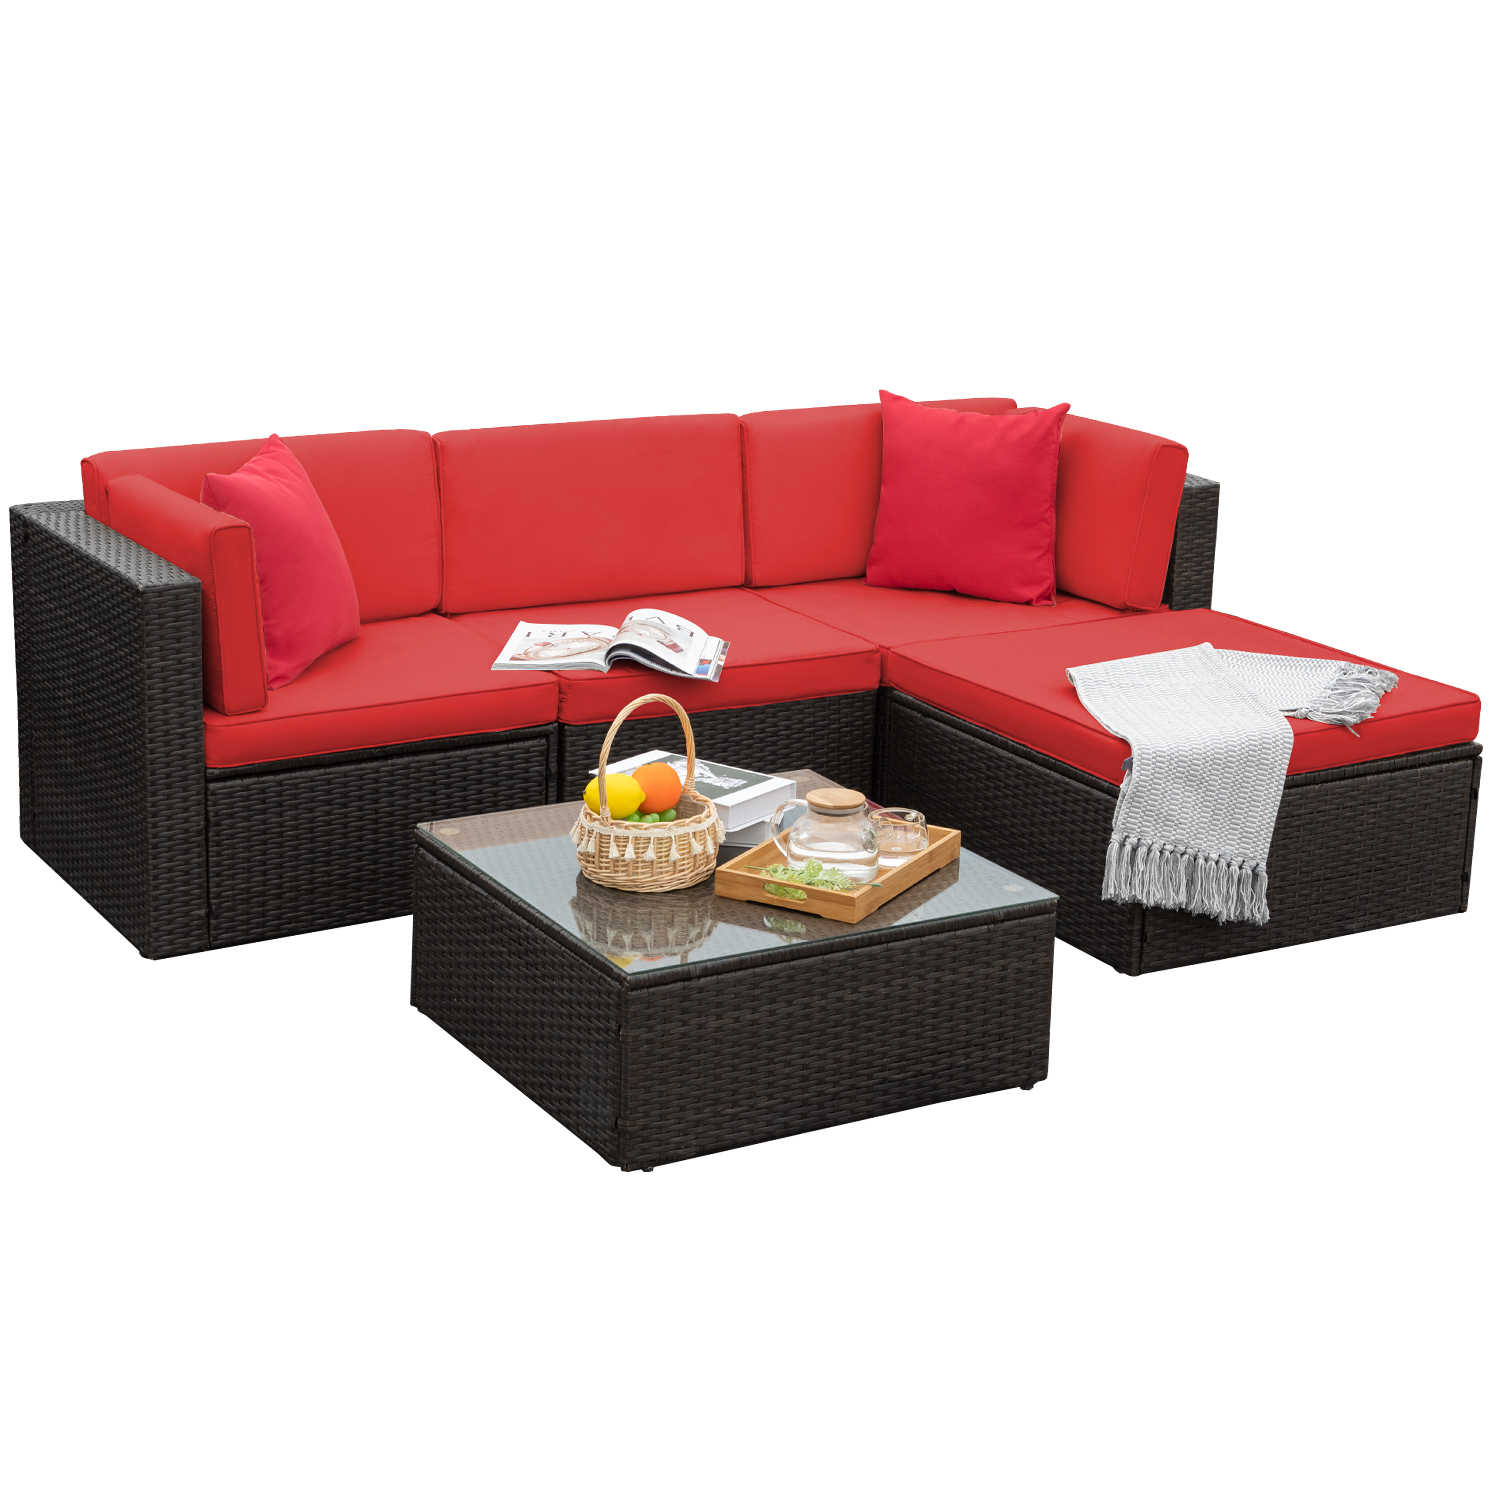 LACOO 5 Pieces Patio Conversation Set Rattan Outdoor Sectional Set with Chushions and Table(Red) - image 5 of 7